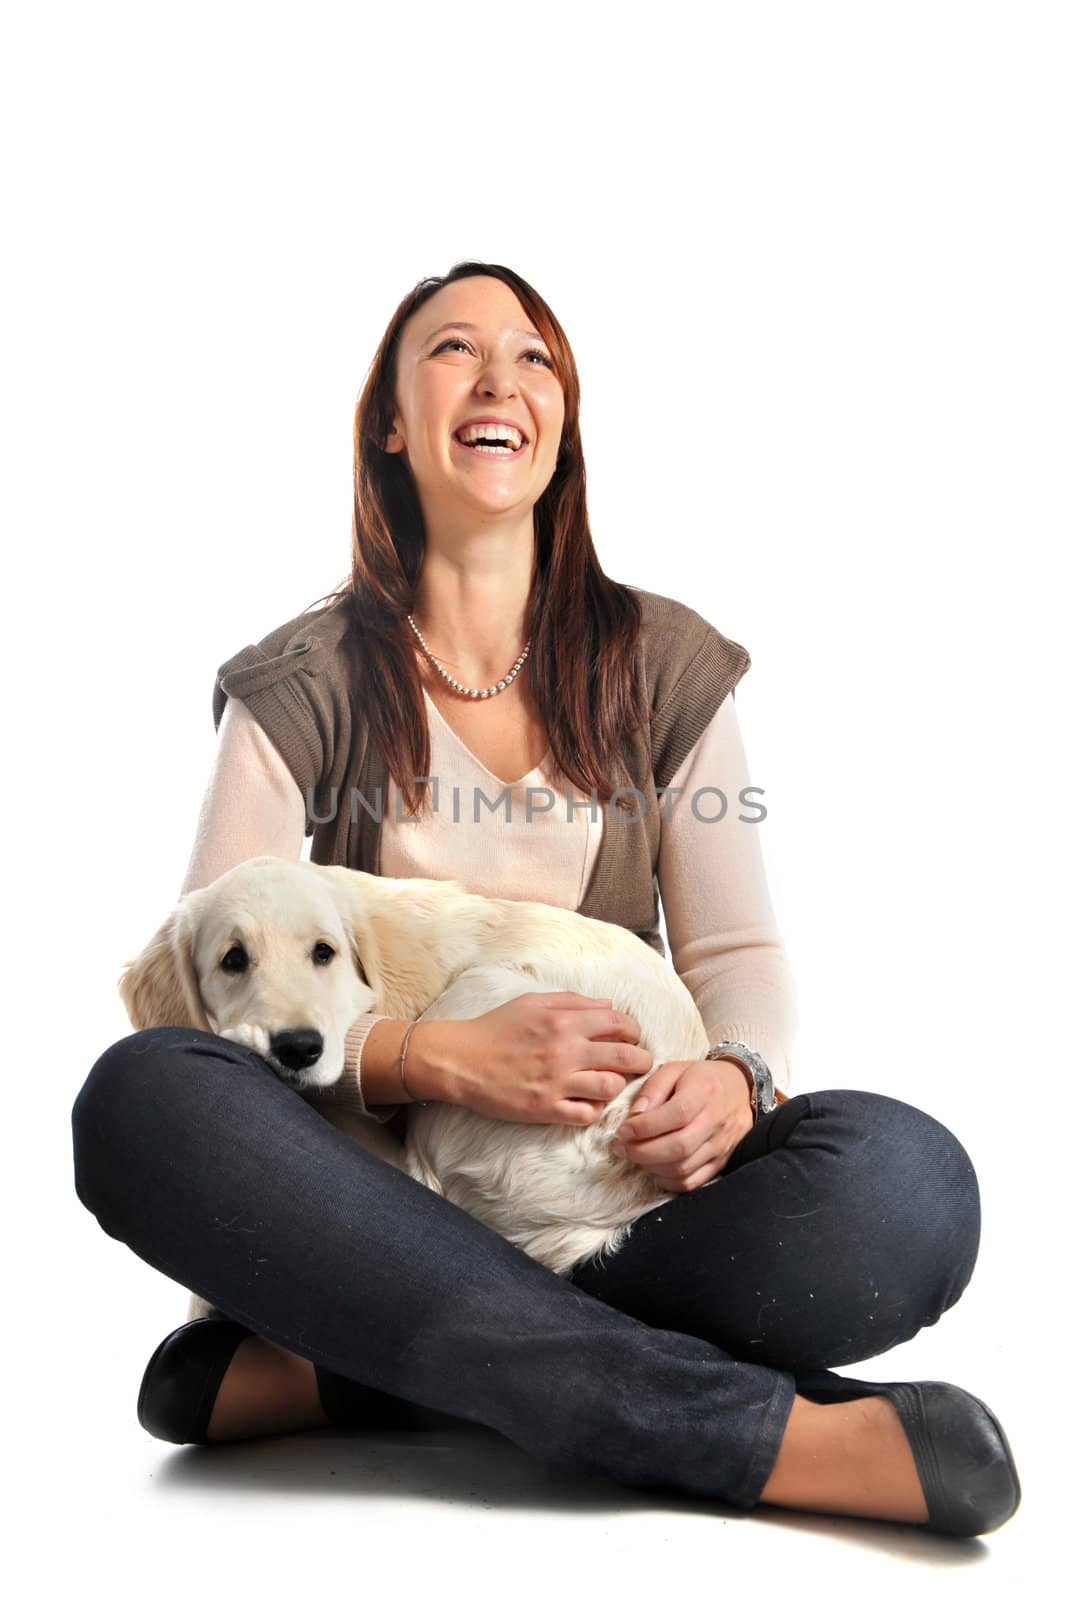 purebred puppy golden retriever and laughing girl in front of a white background